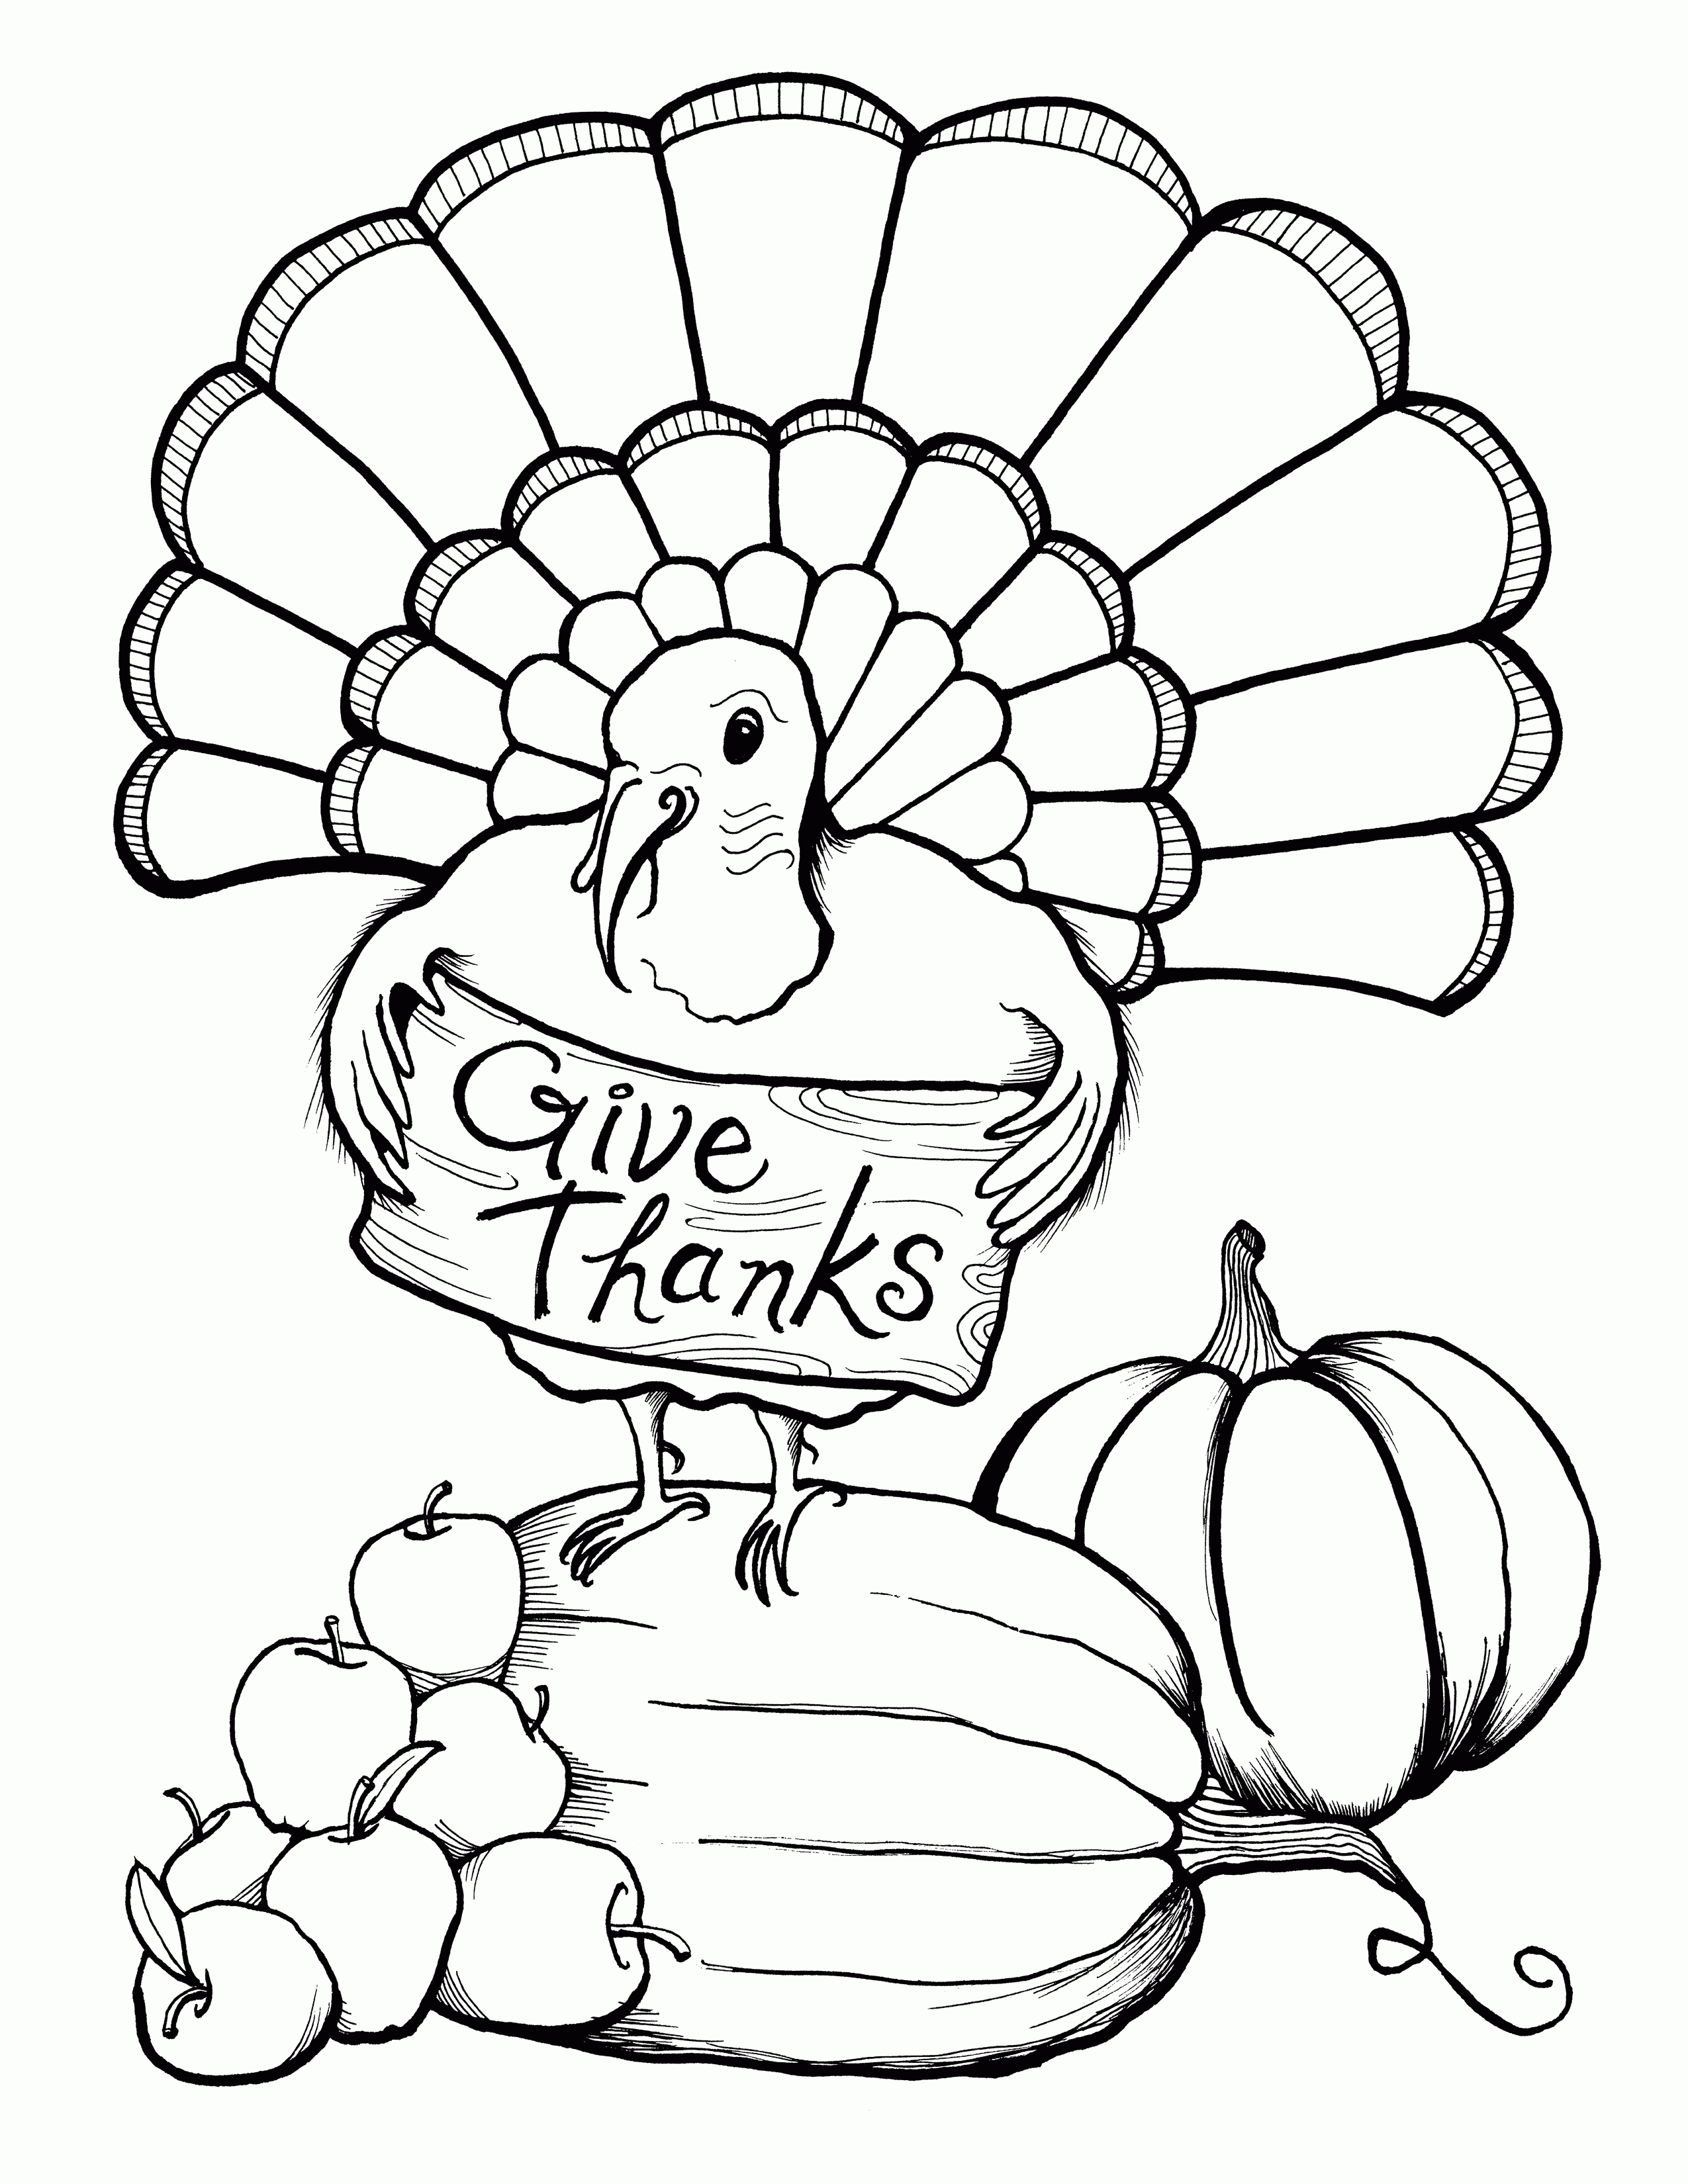 Download Thanksgiving Preschool Coloring Pages - Coloring Home